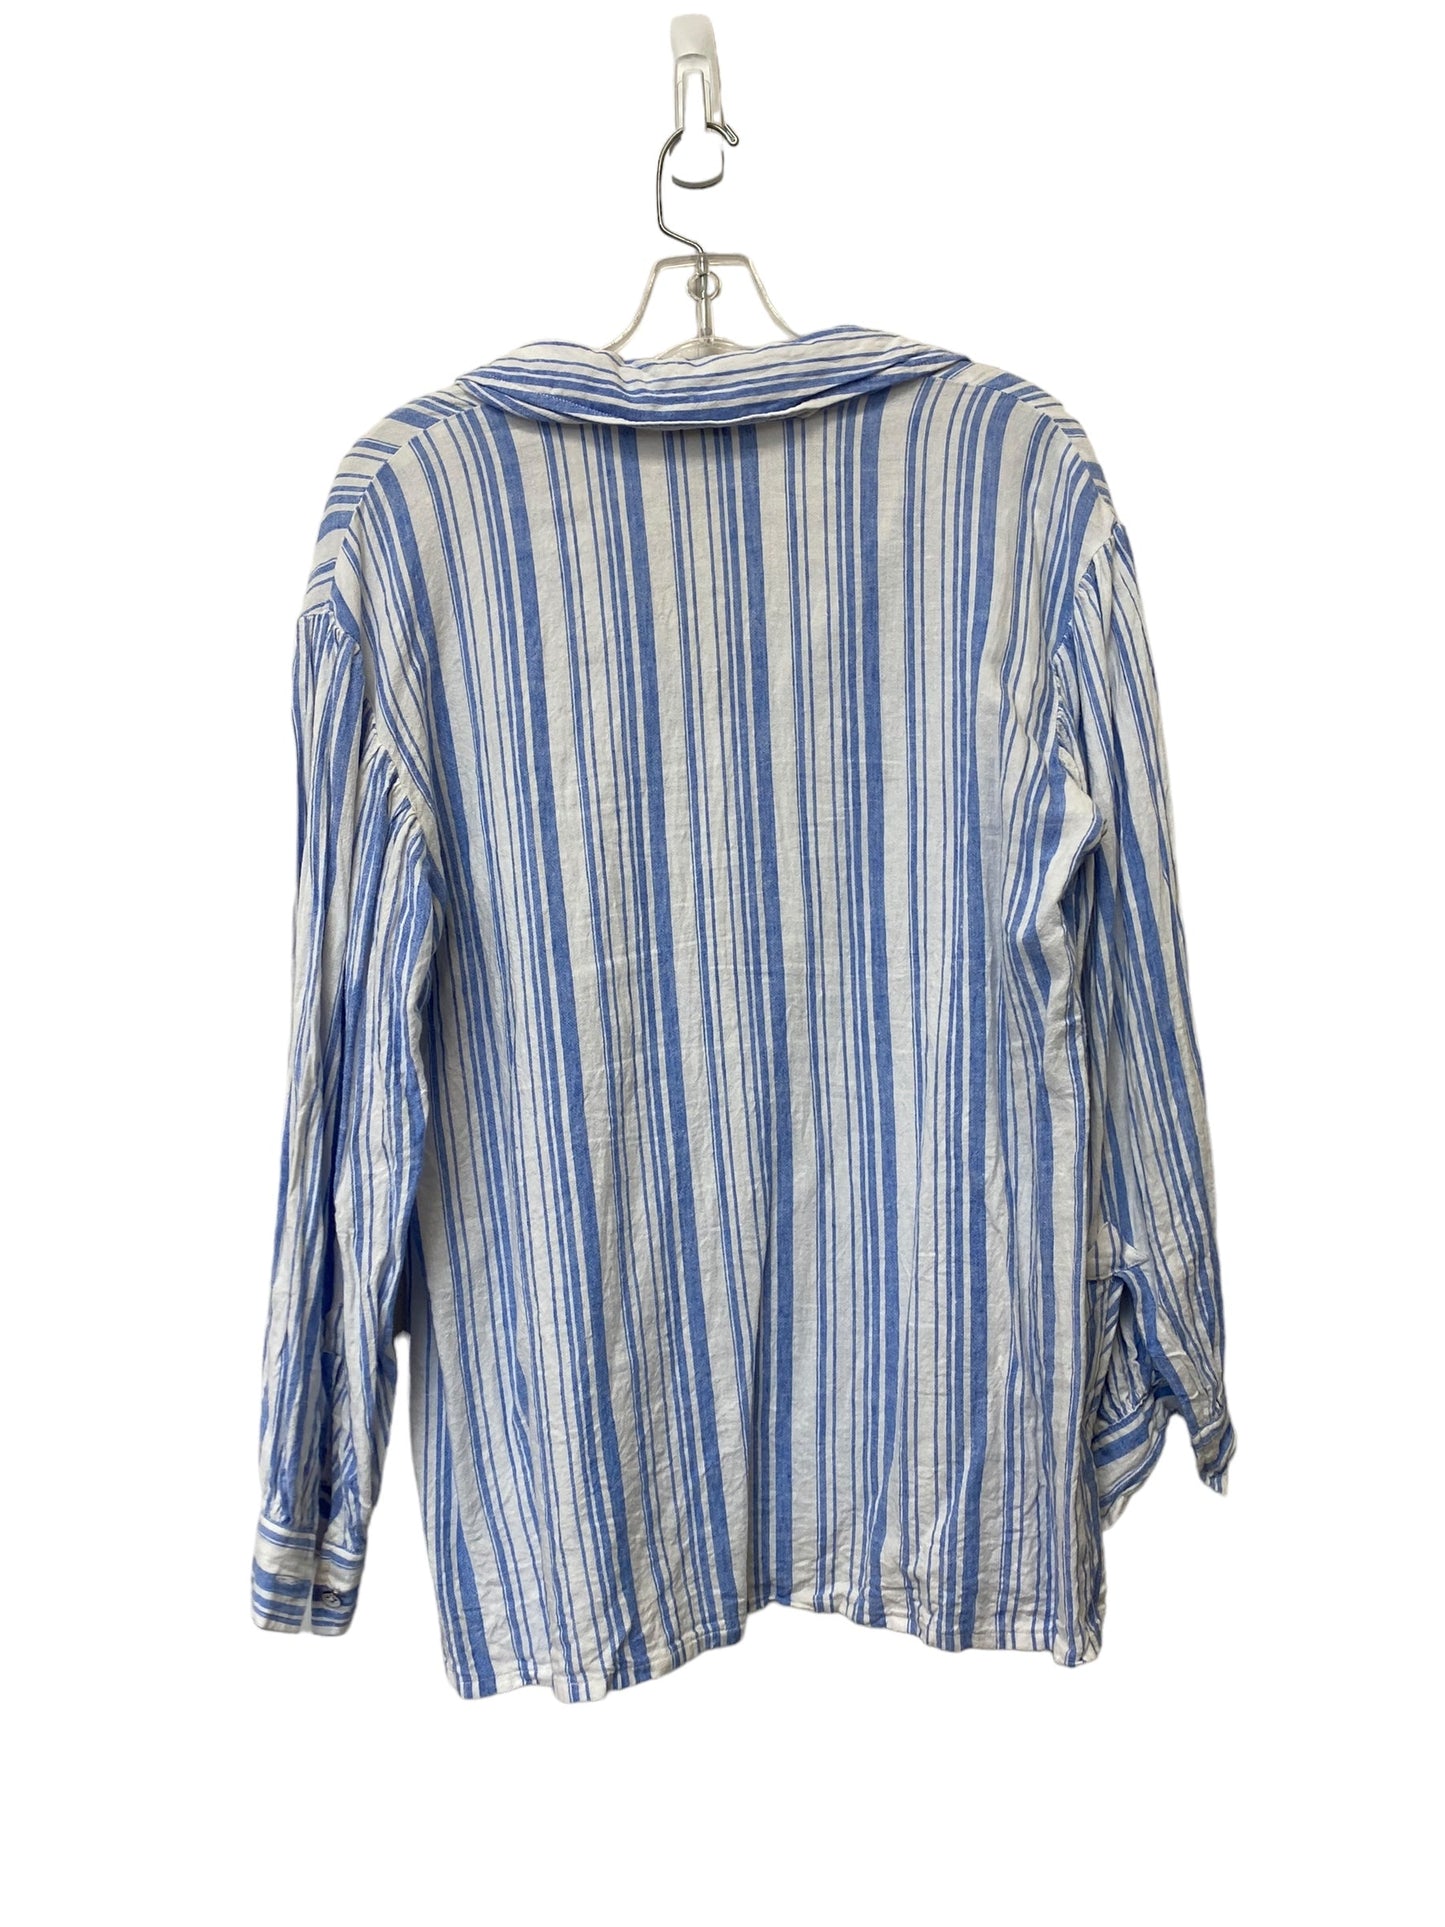 Striped Pattern Top Long Sleeve Cabi, Size S